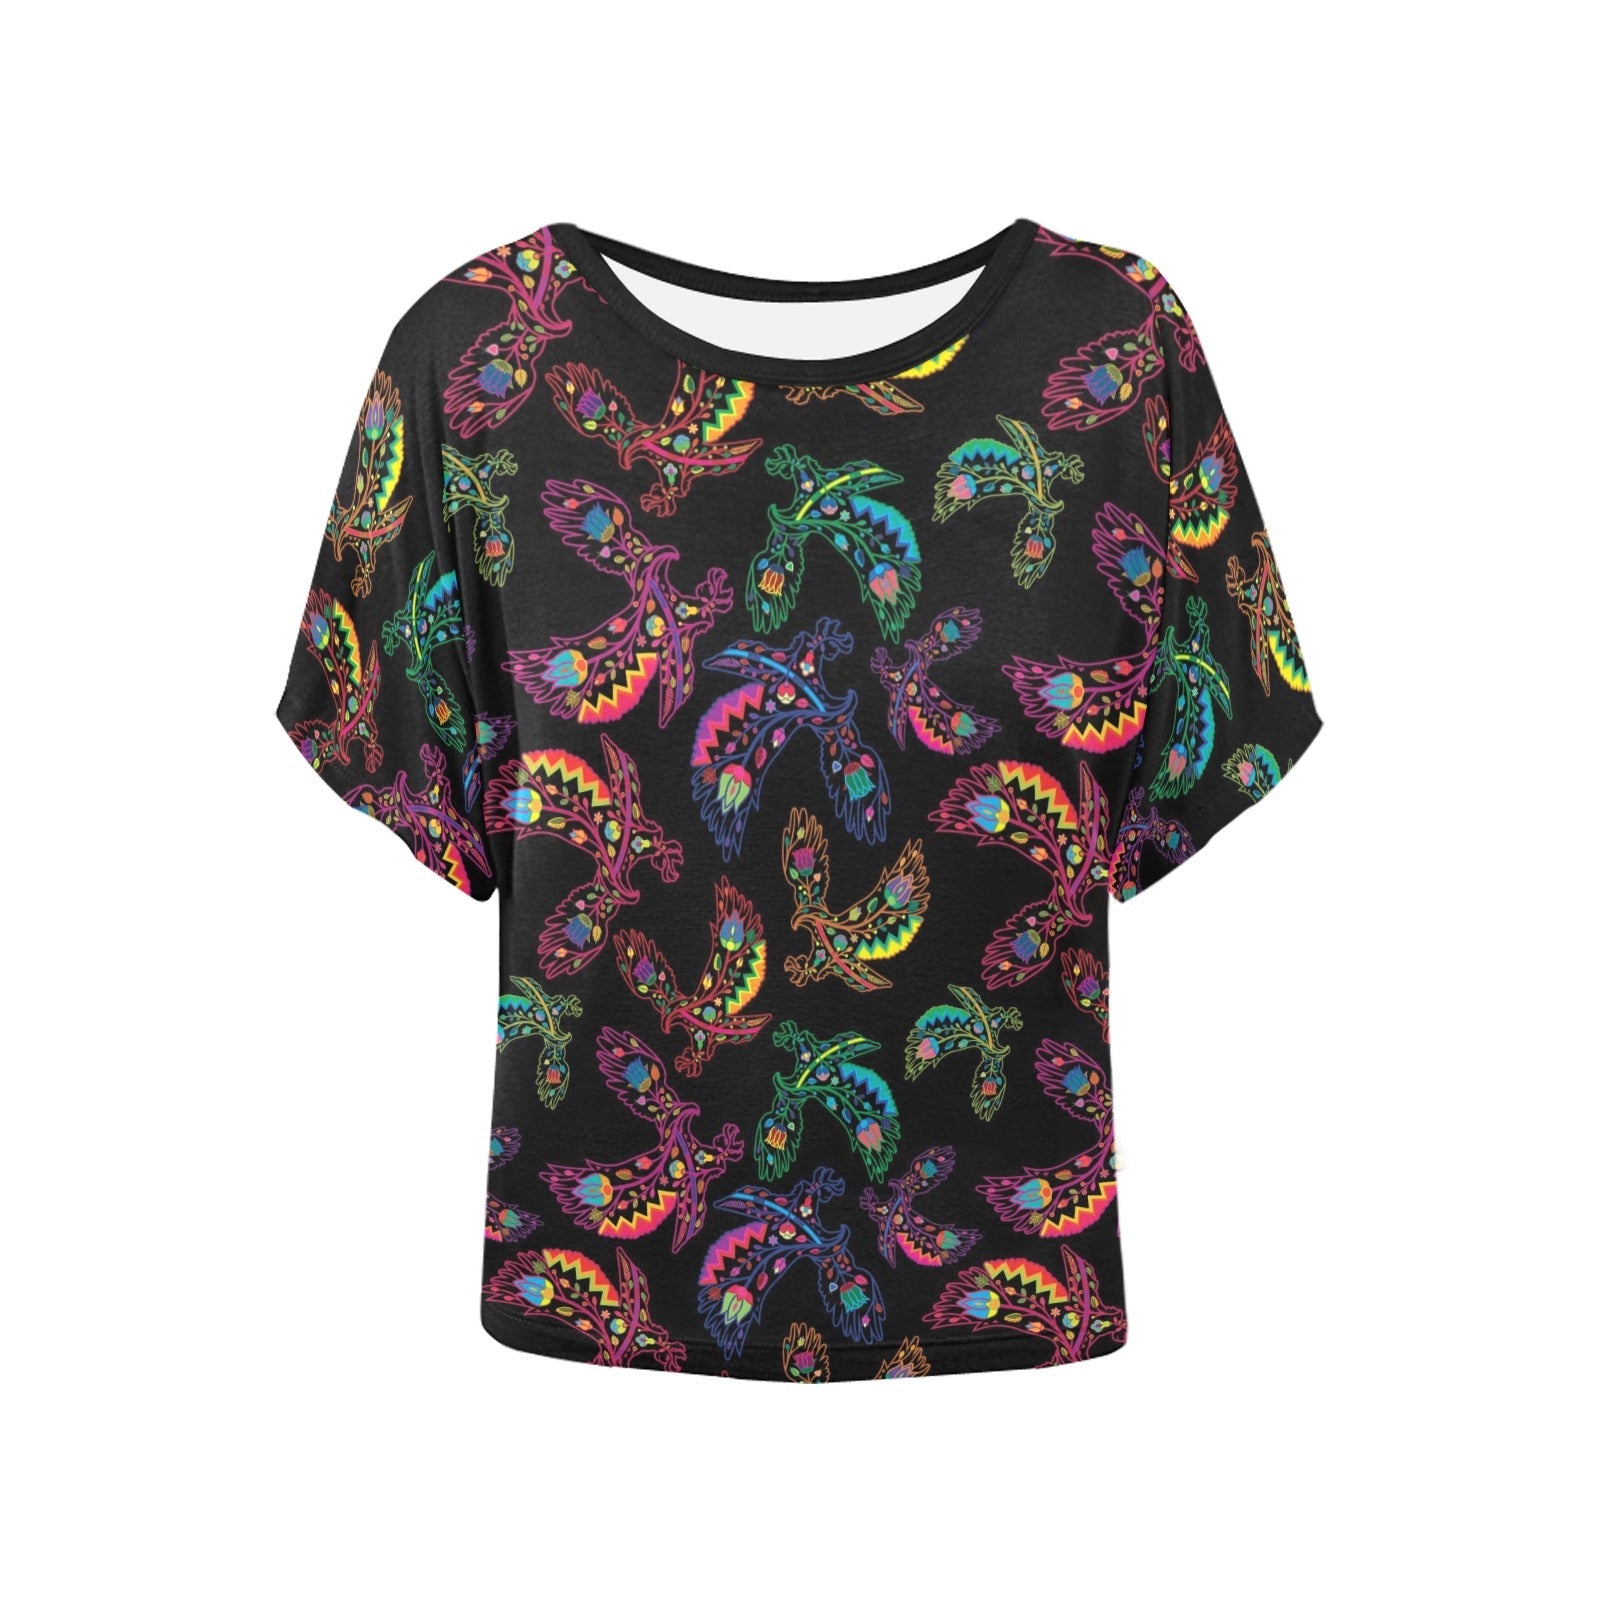 Neon Floral Eagles Women's Batwing-Sleeved Blouse T shirt (Model T44) Women's Batwing-Sleeved Blouse T shirt (T44) e-joyer 